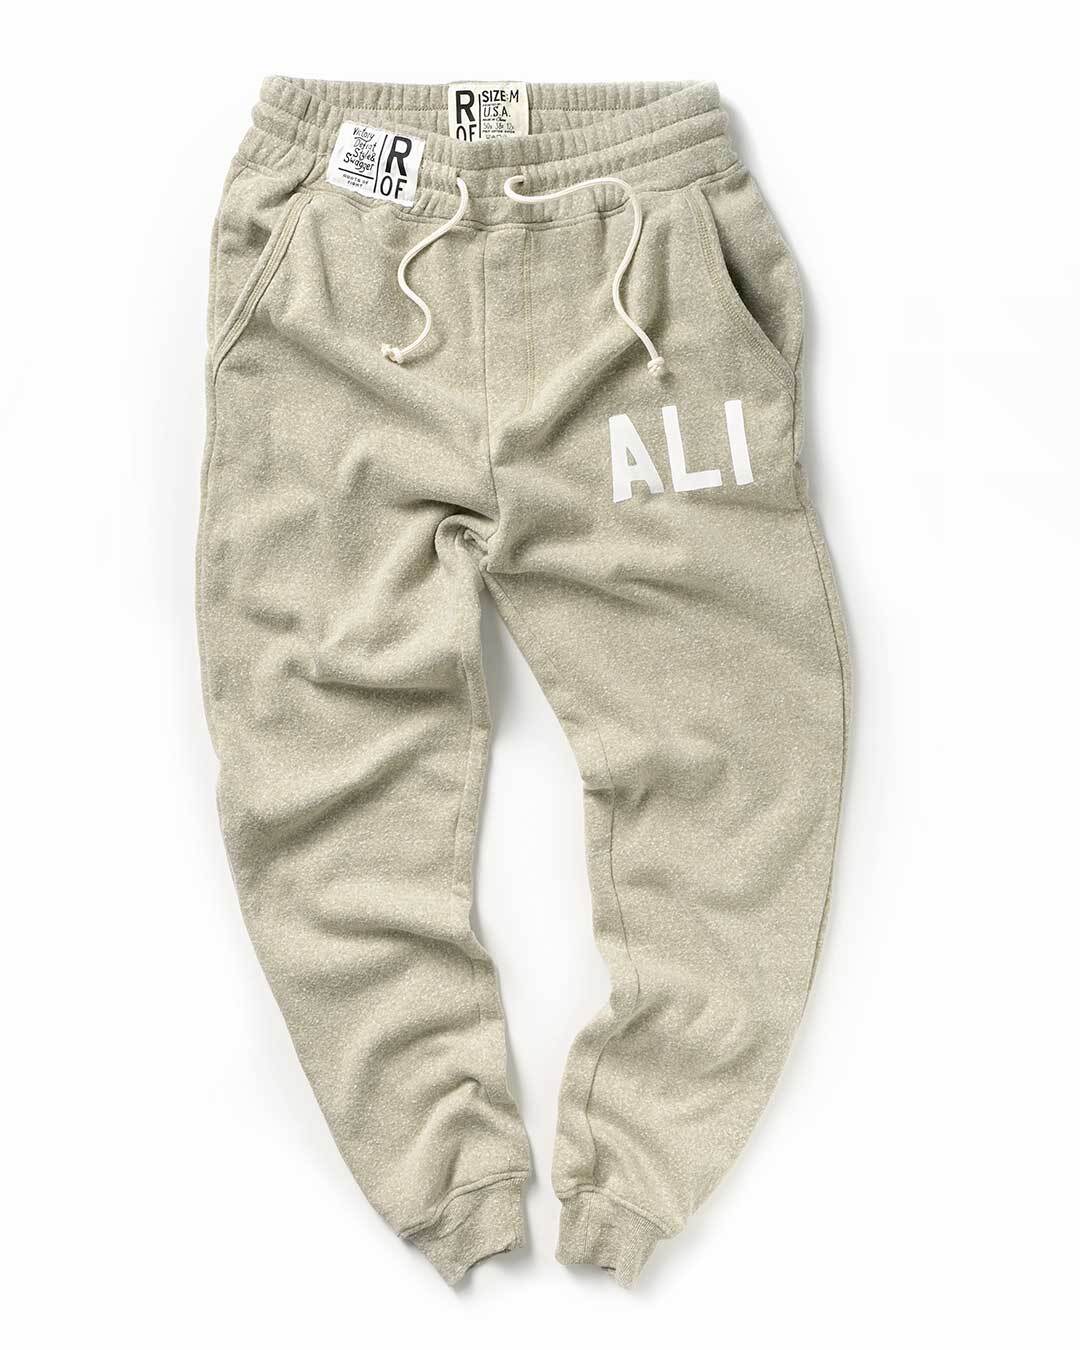 Ali Classic Heather Sage Sweatpants - Roots of Fight Canada